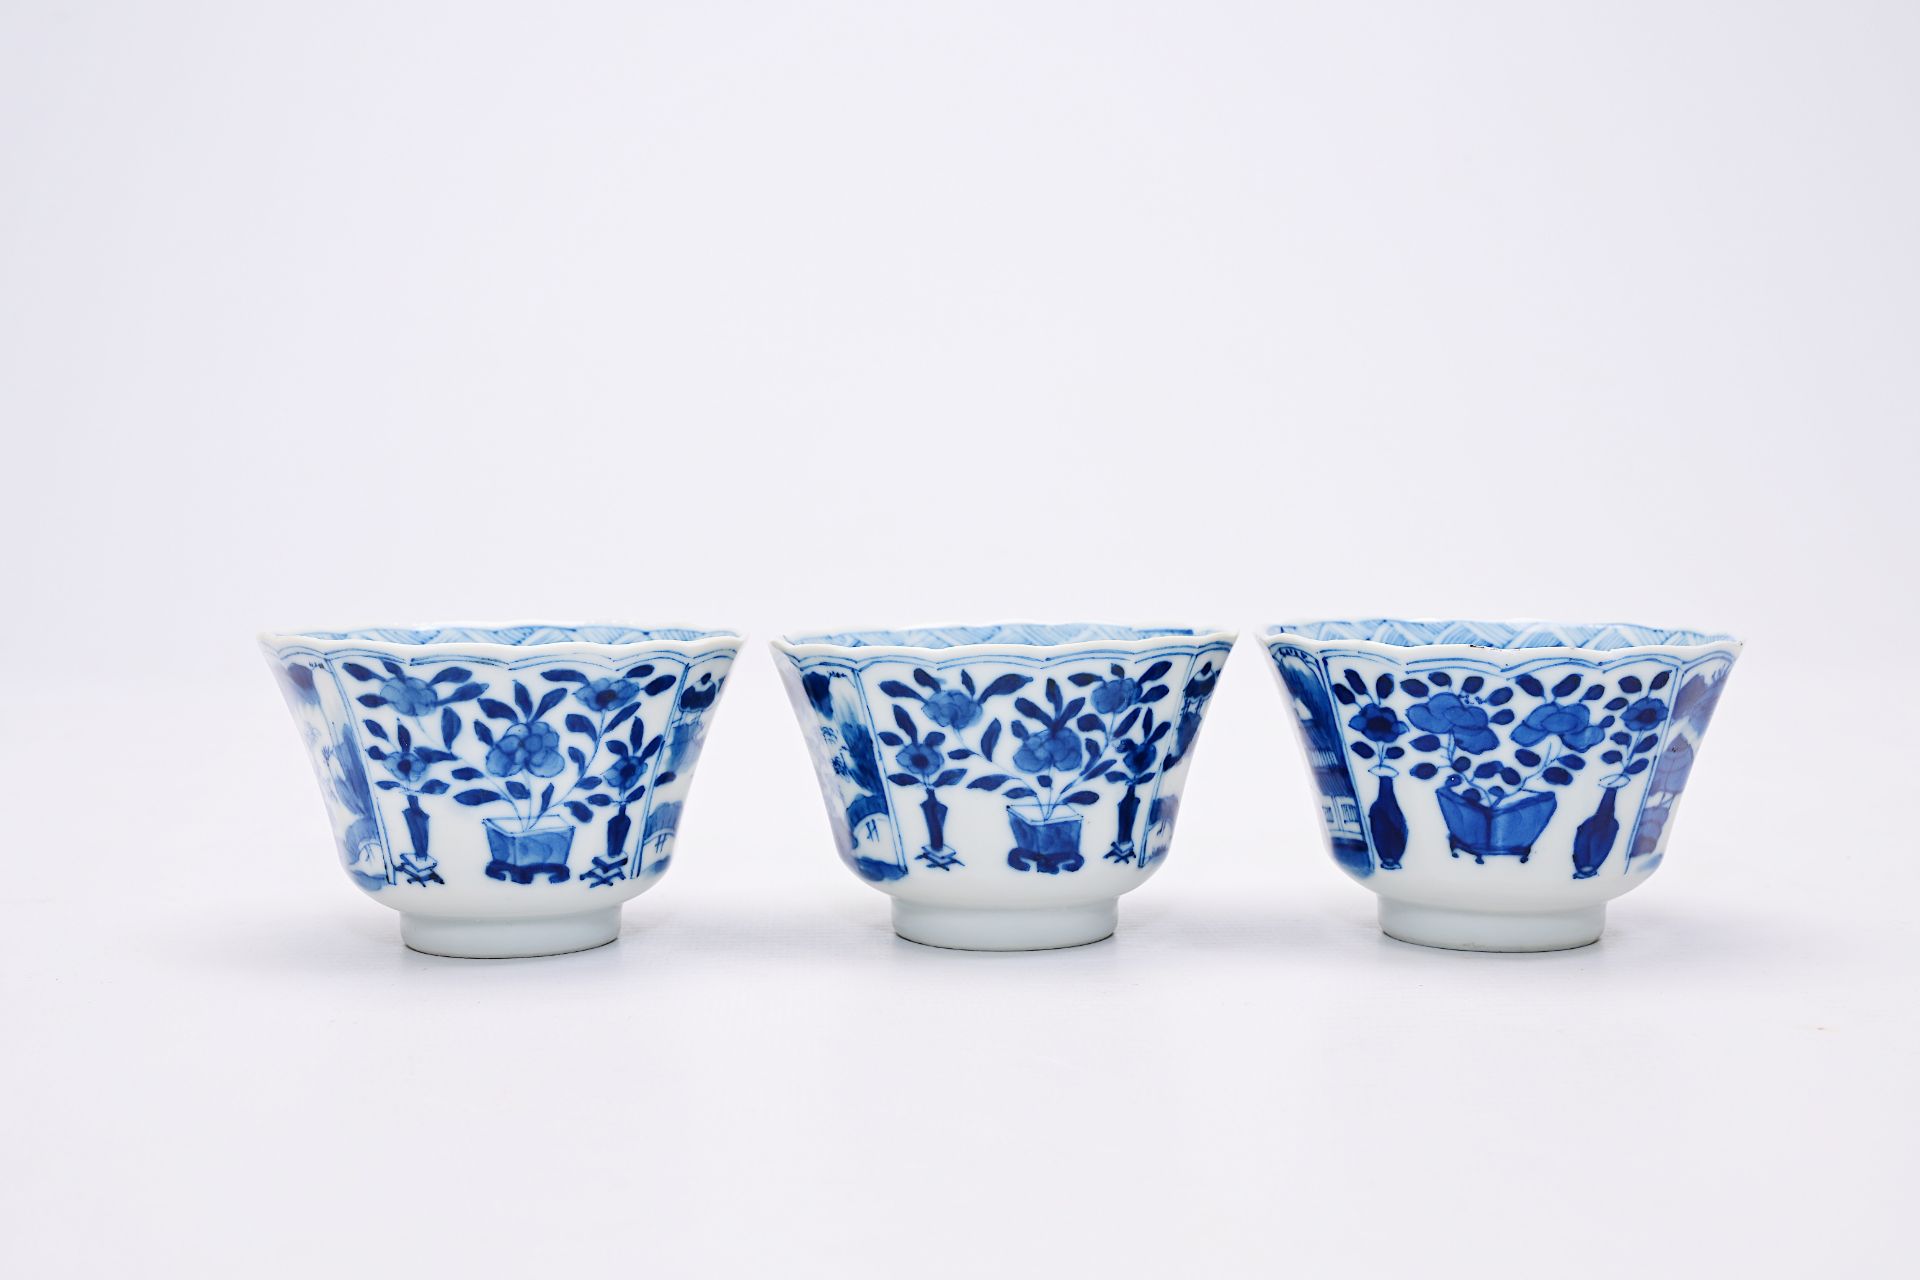 A varied collection of Chinese blue and white porcelain with floral design and figures in a landscap - Image 12 of 22